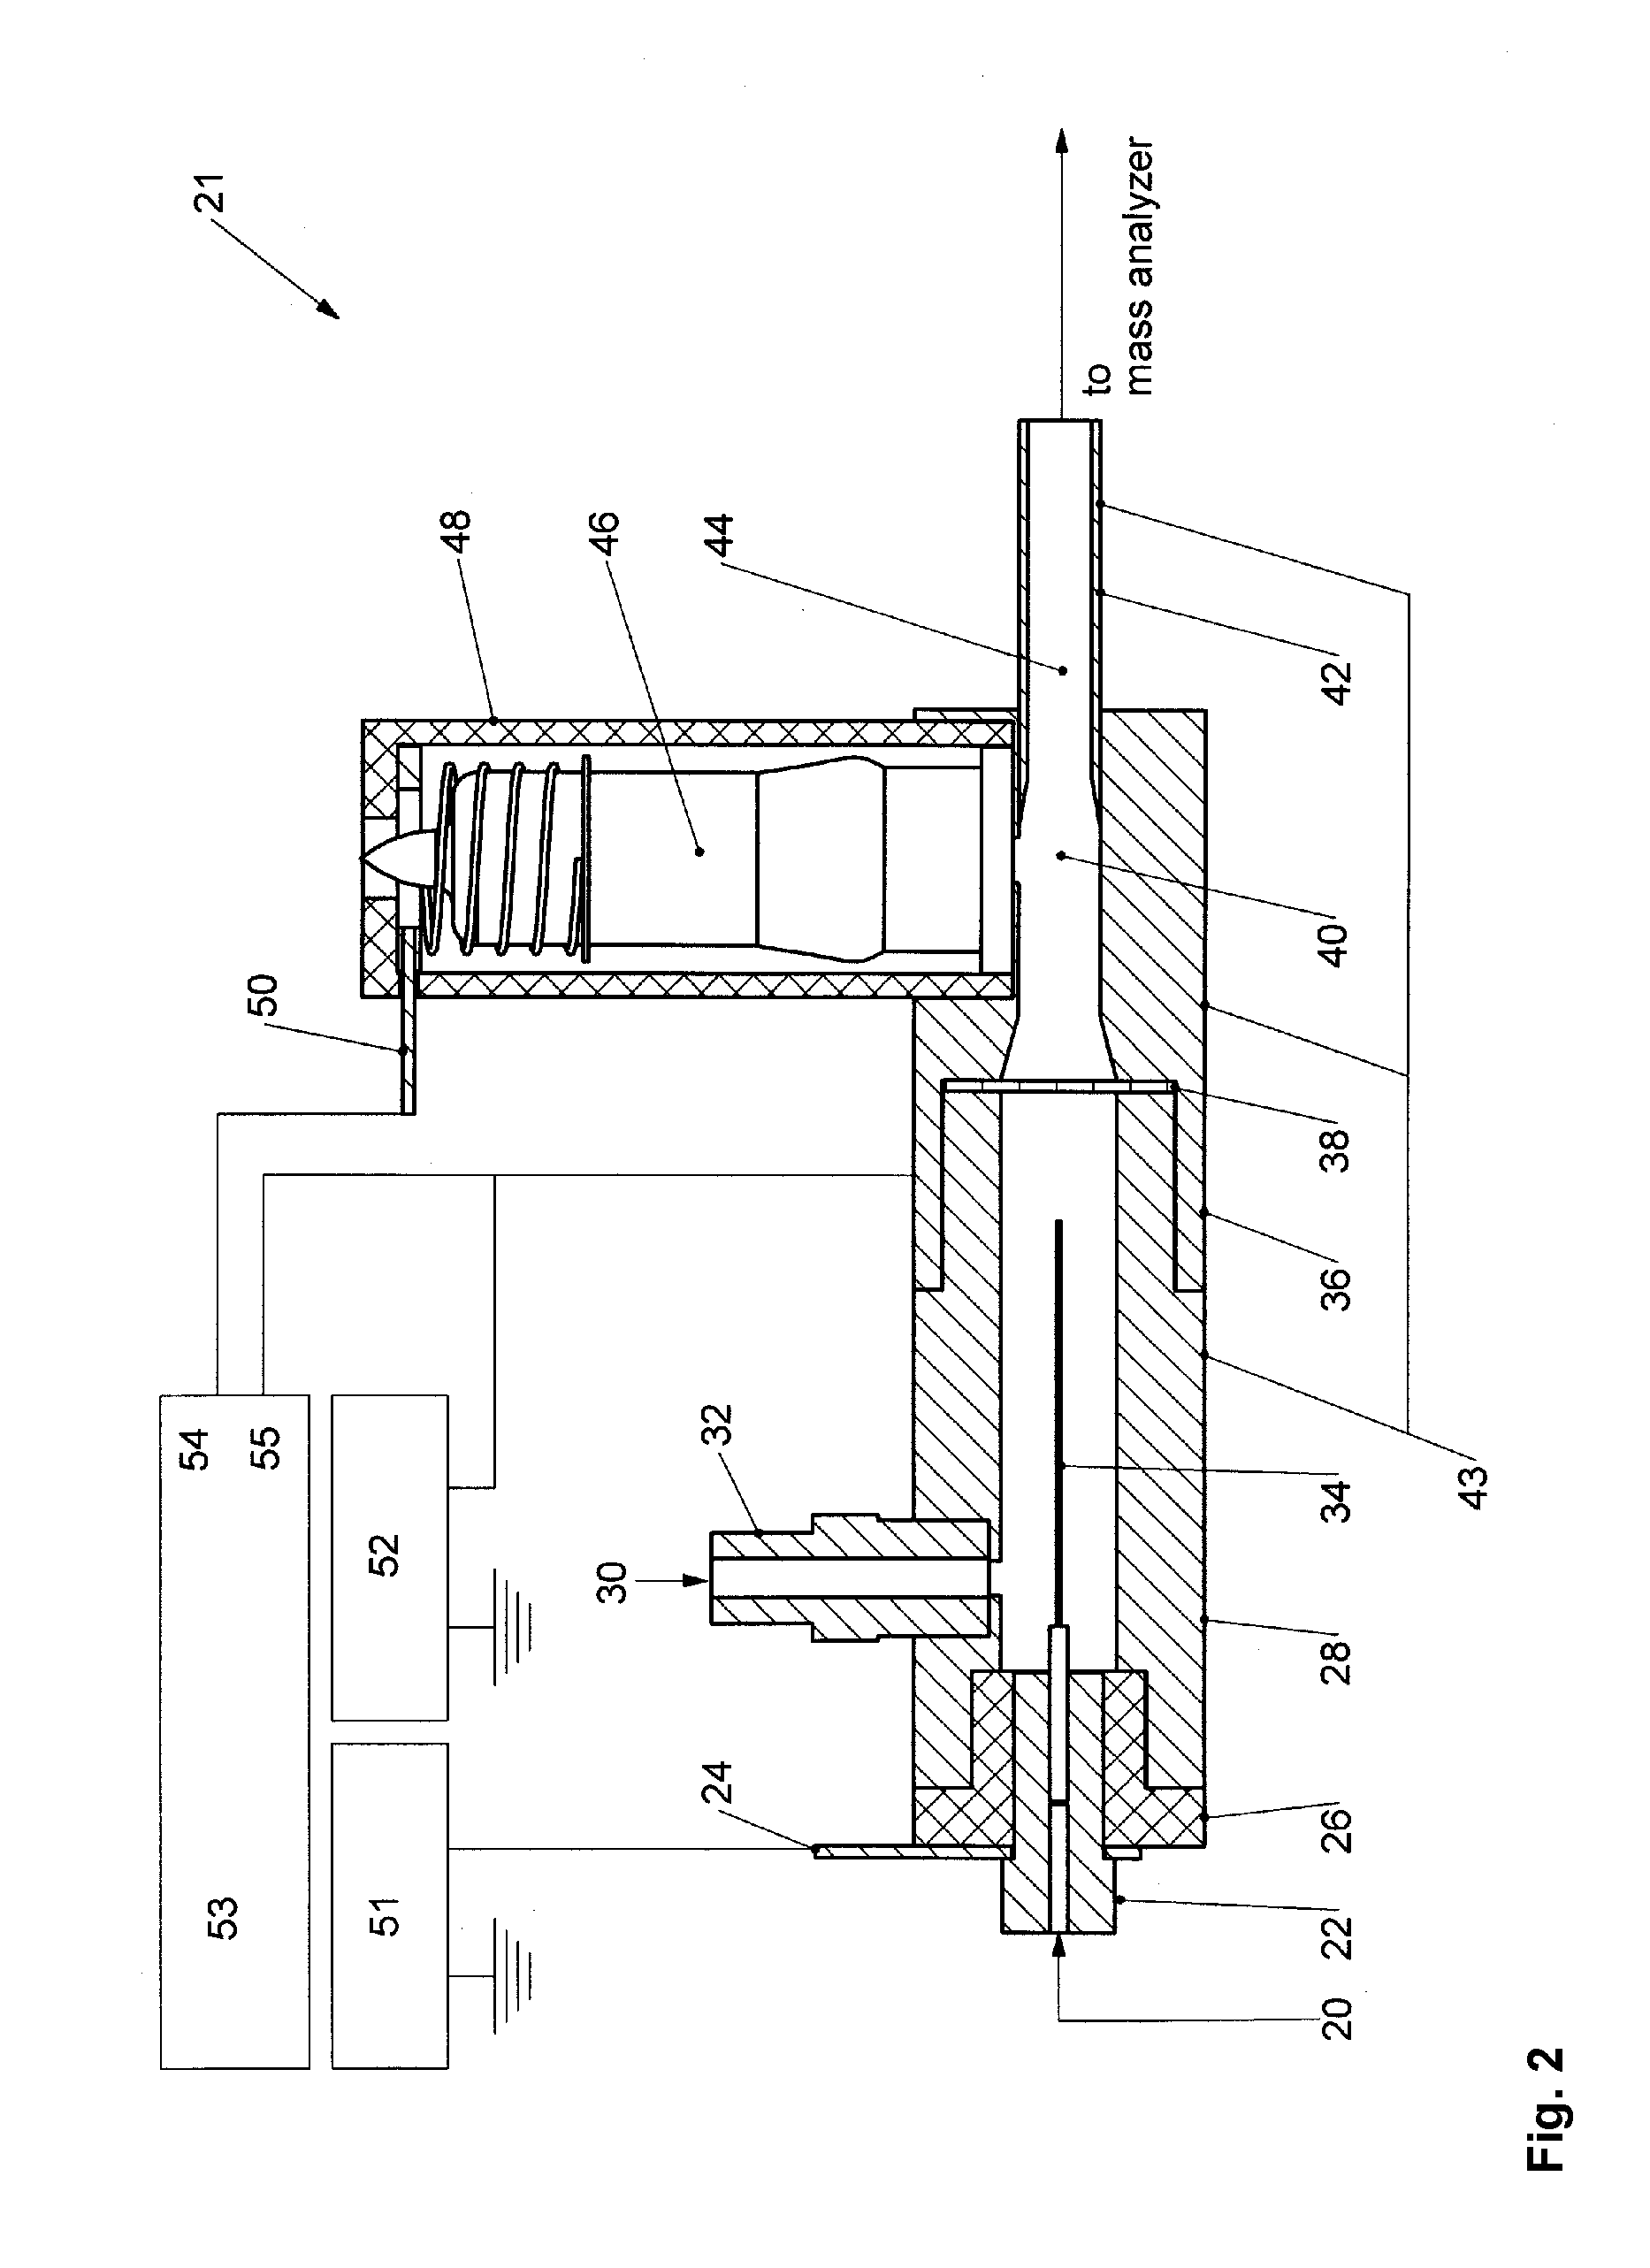 AP-ECD methods and apparatus for mass spectrometric analysis of peptides and proteins